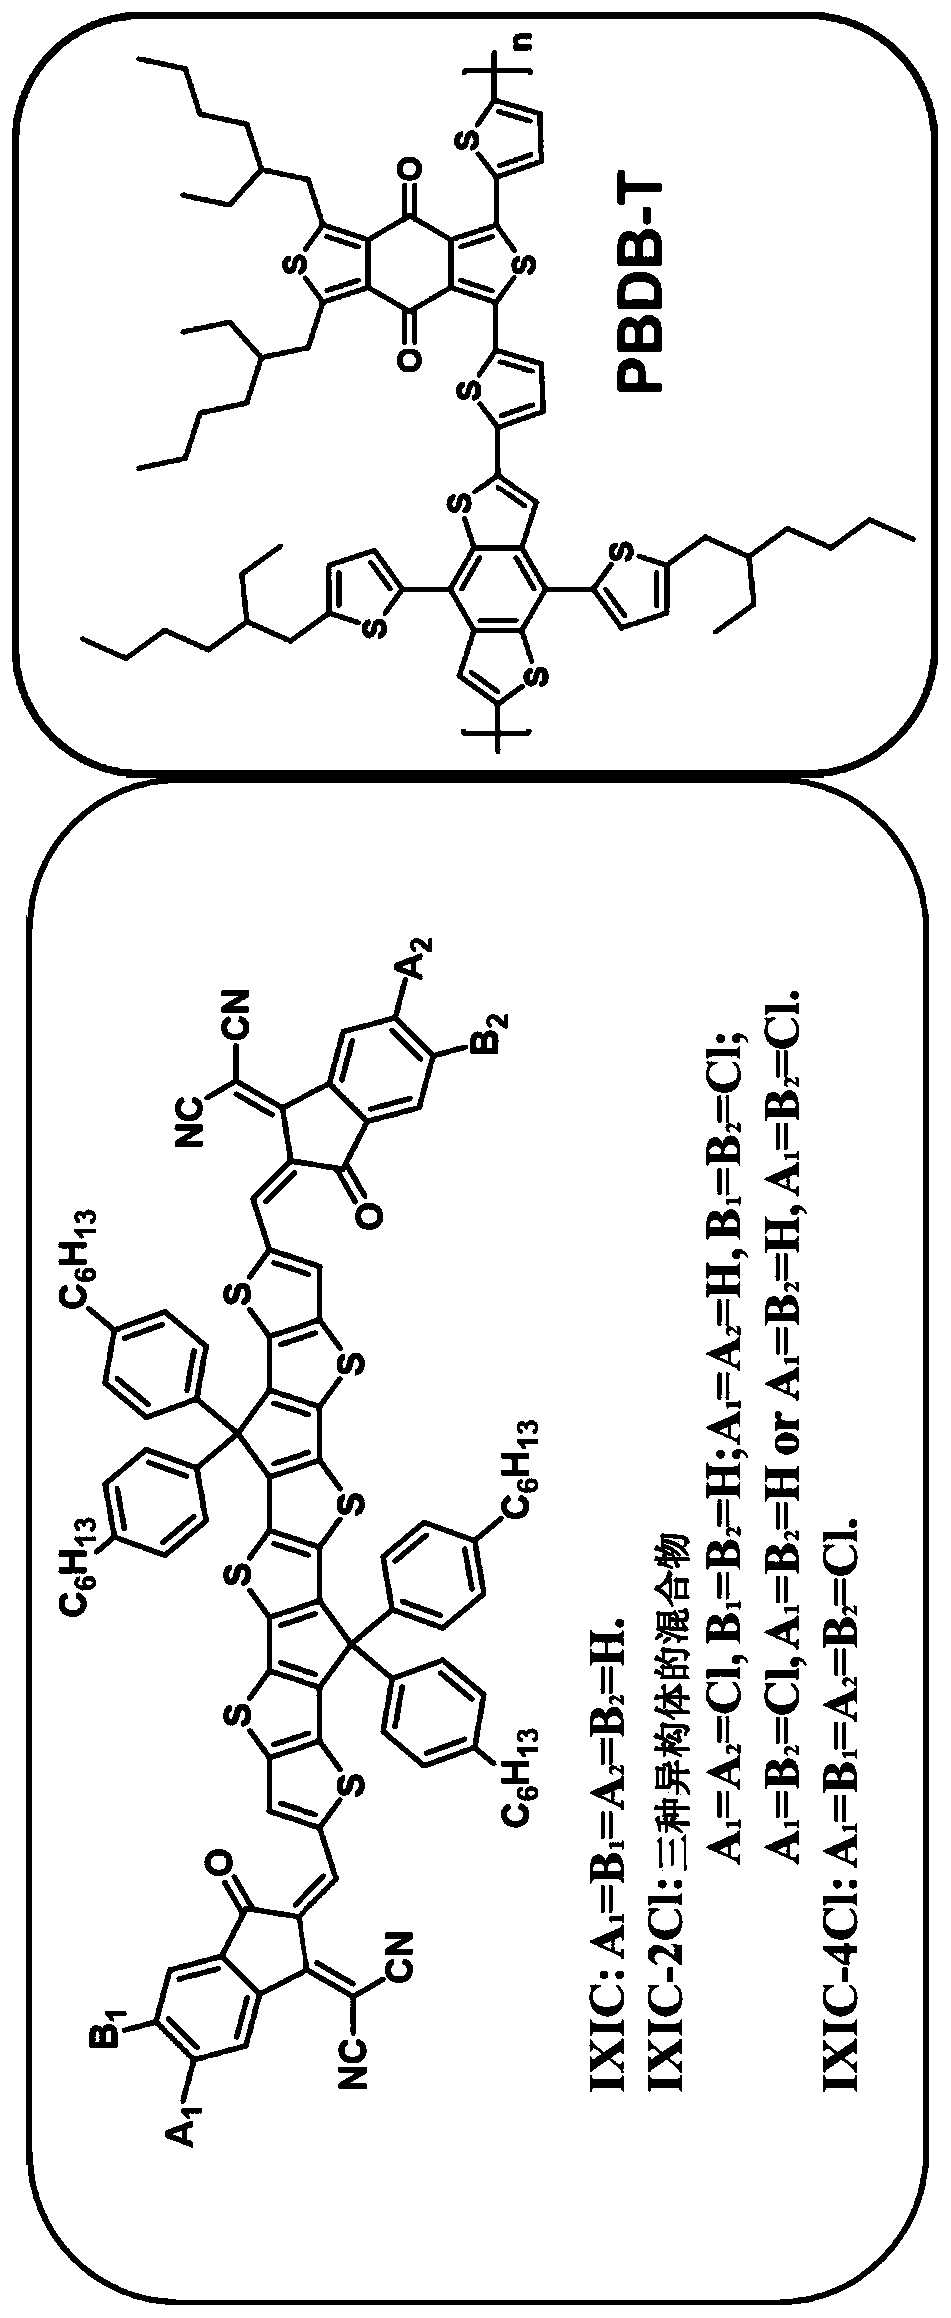 Thiophene-based fused aromatic systems